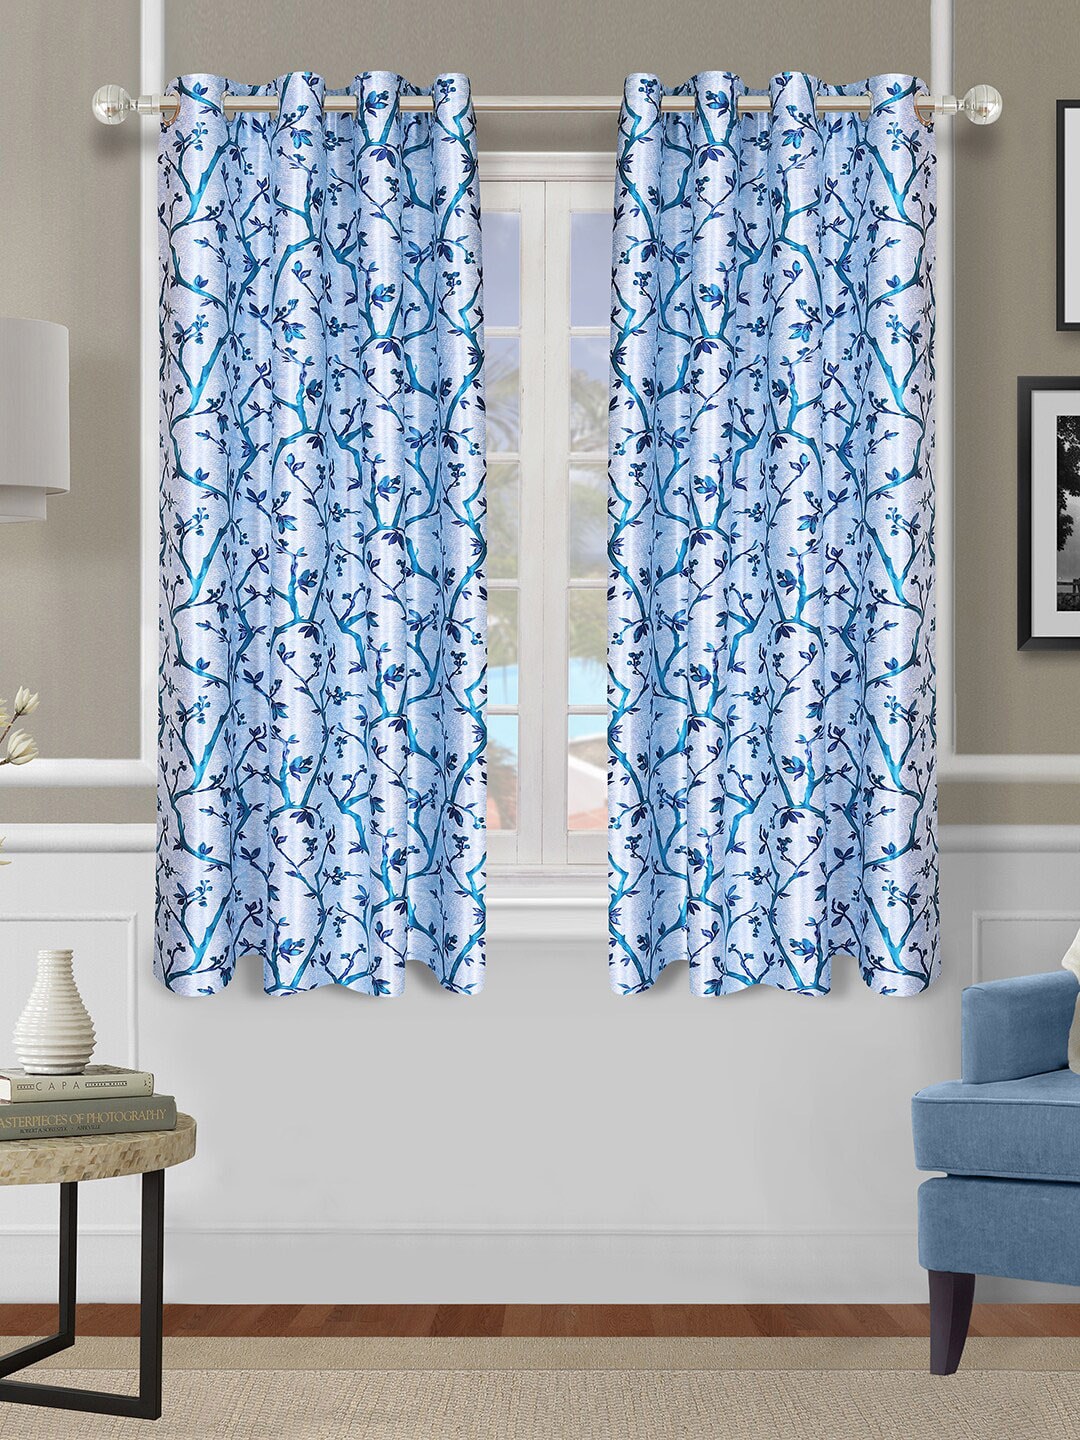 ROMEE Set of 2 Blue & White Floral Room Darkening Window Curtains Price in India